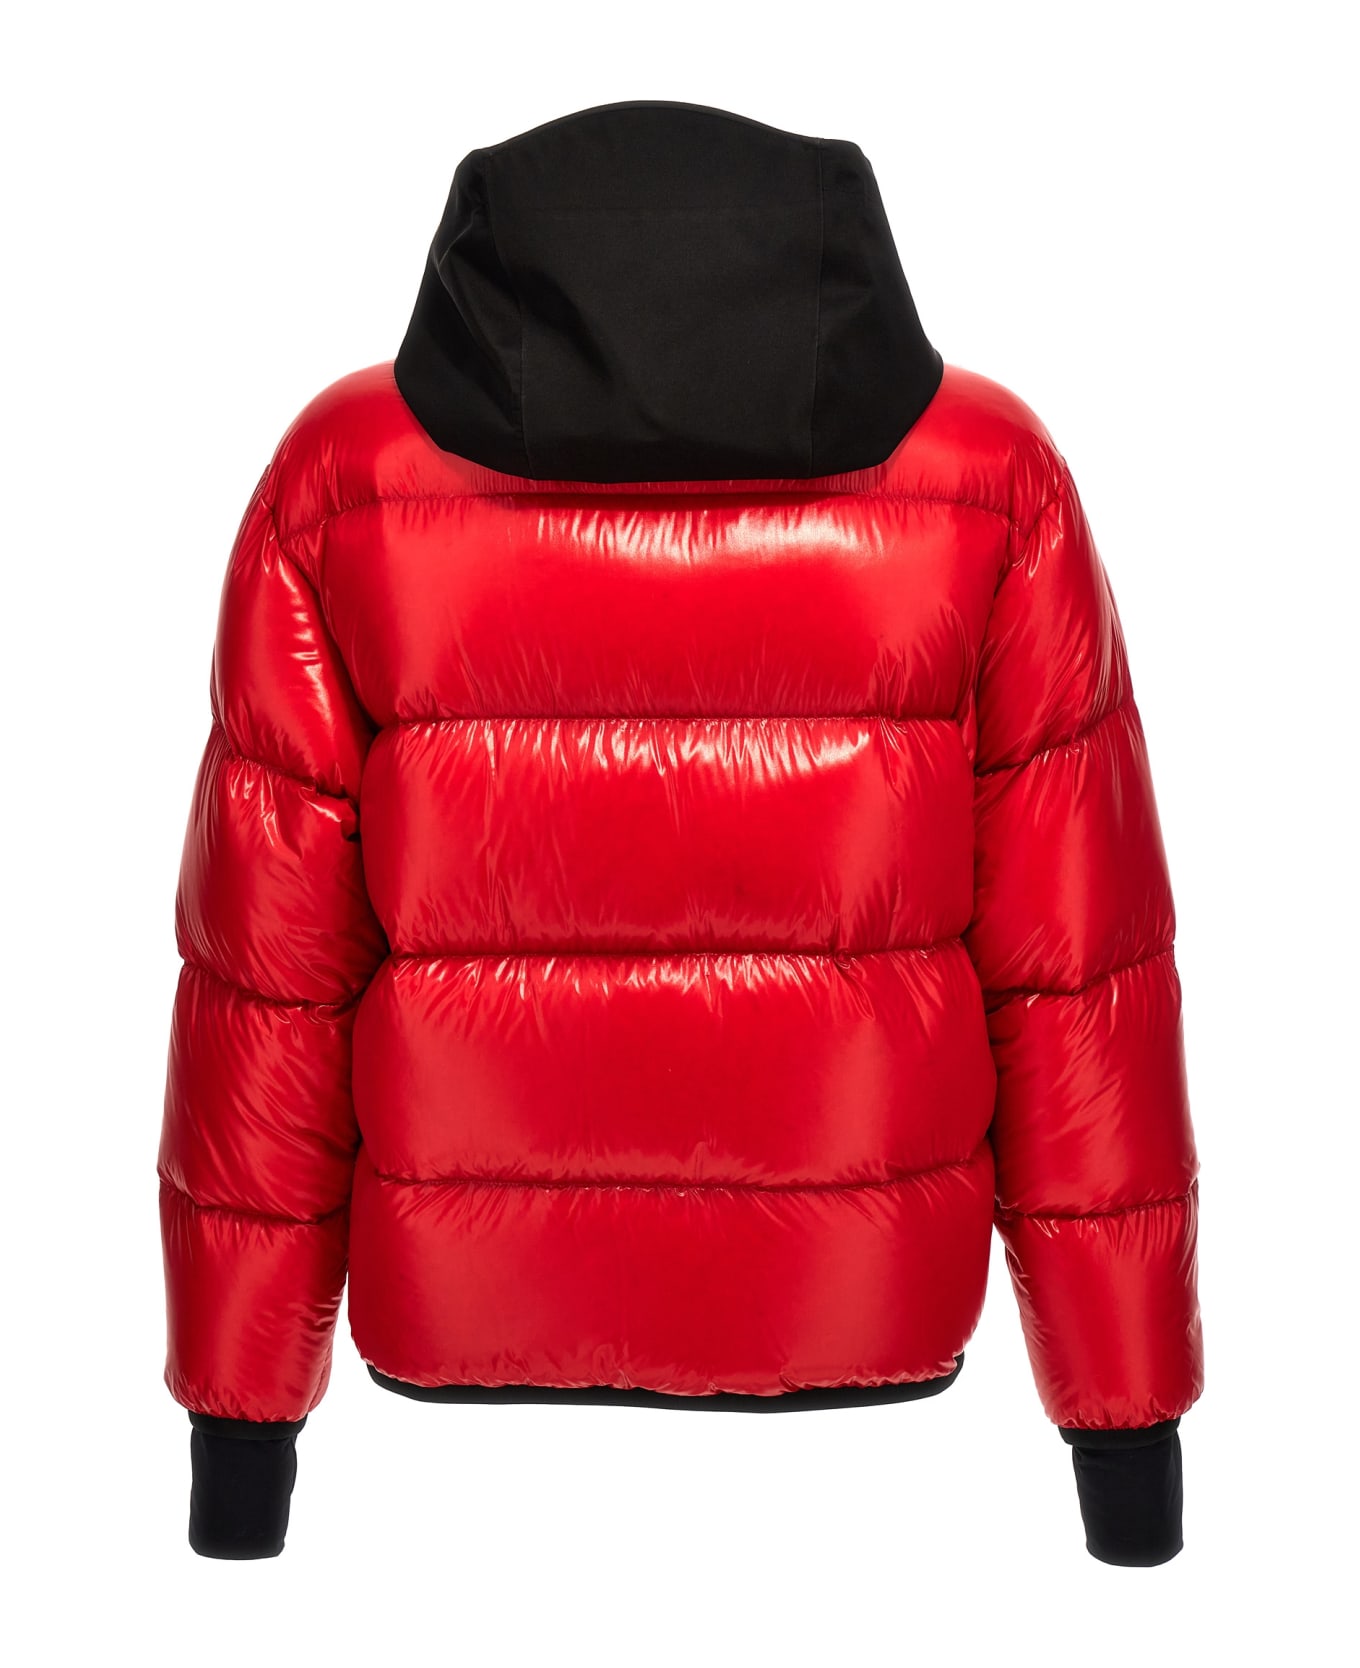 Moncler Grenoble 'marcassin' Down Jacket - Red